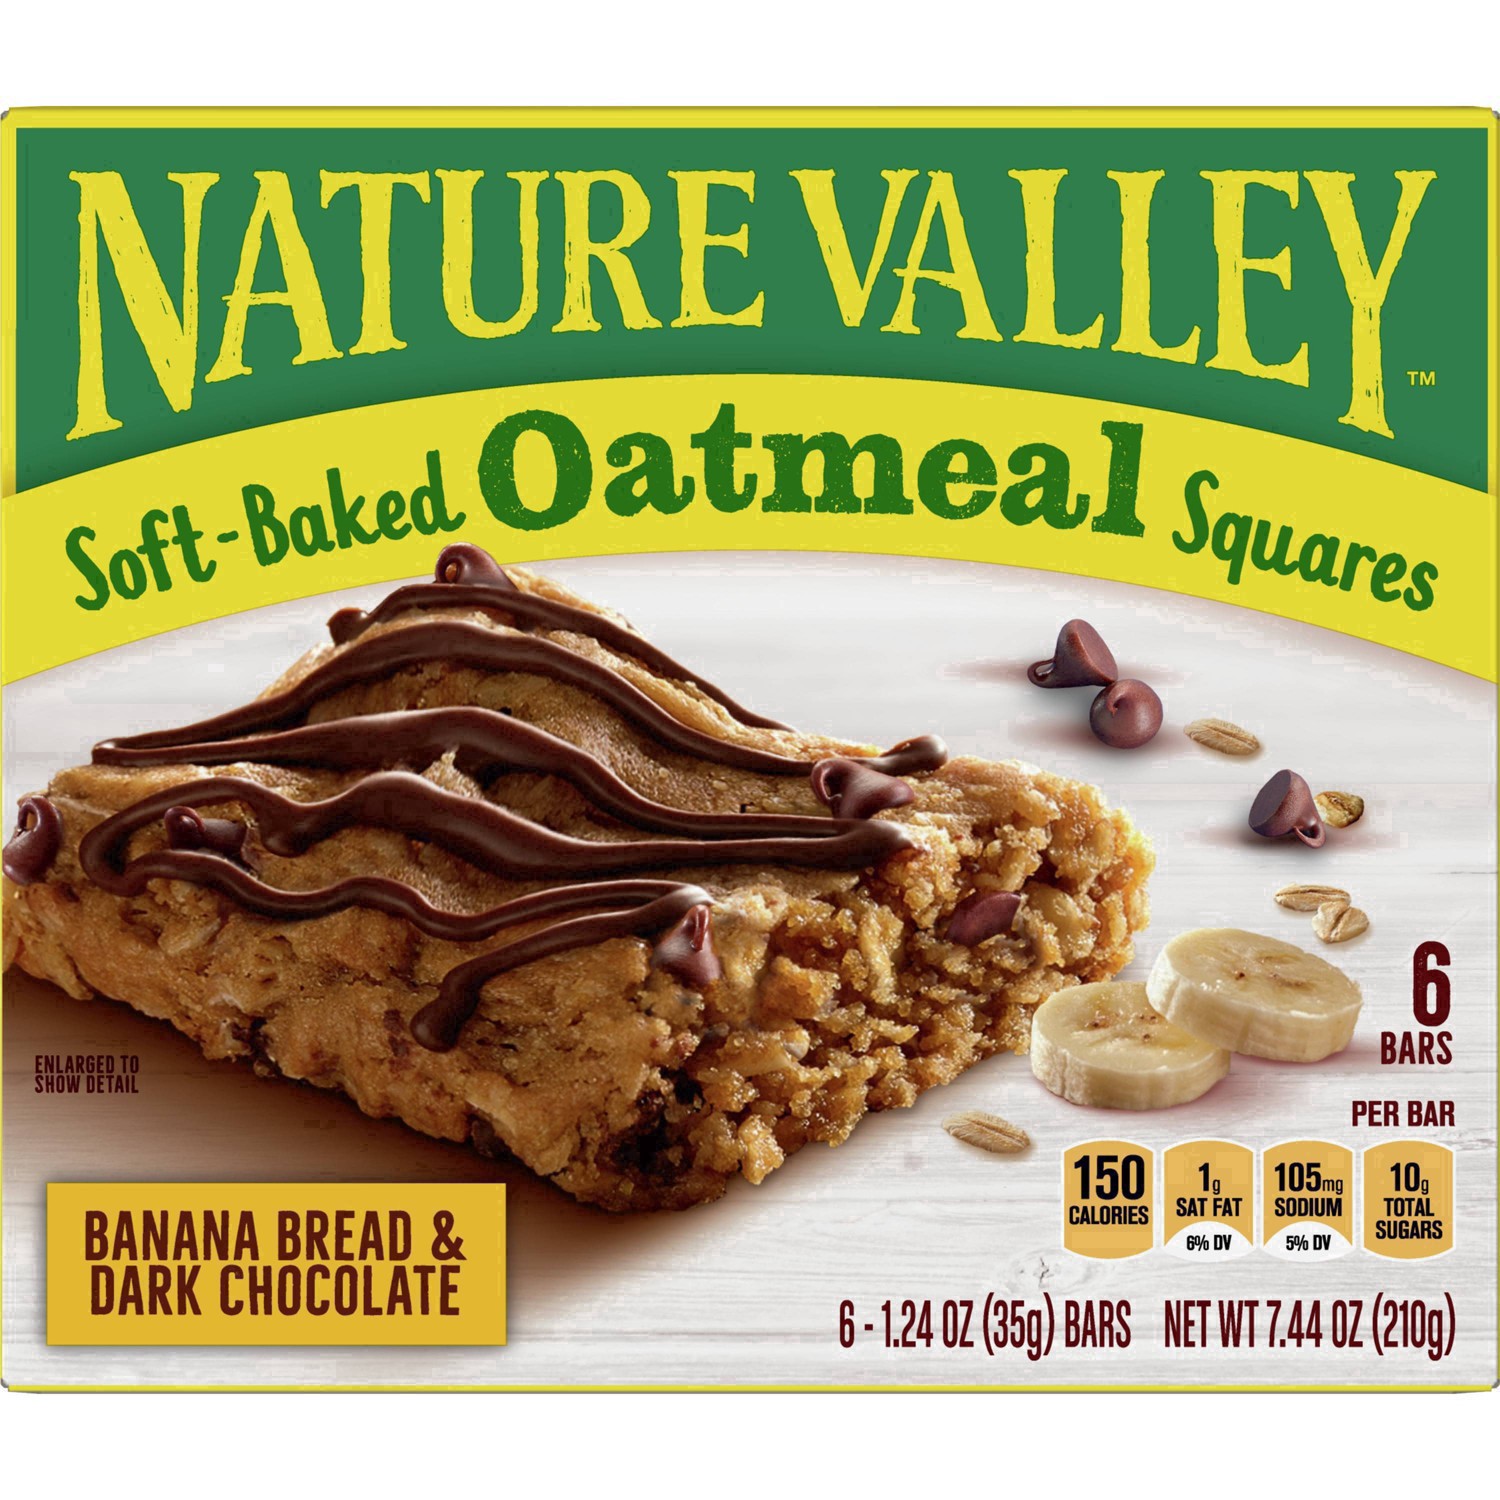 slide 79 of 101, Nature Valley Soft-Baked Oatmeal Squares, Banana Bread & Dark Chocolate, 6 ct, 6 ct